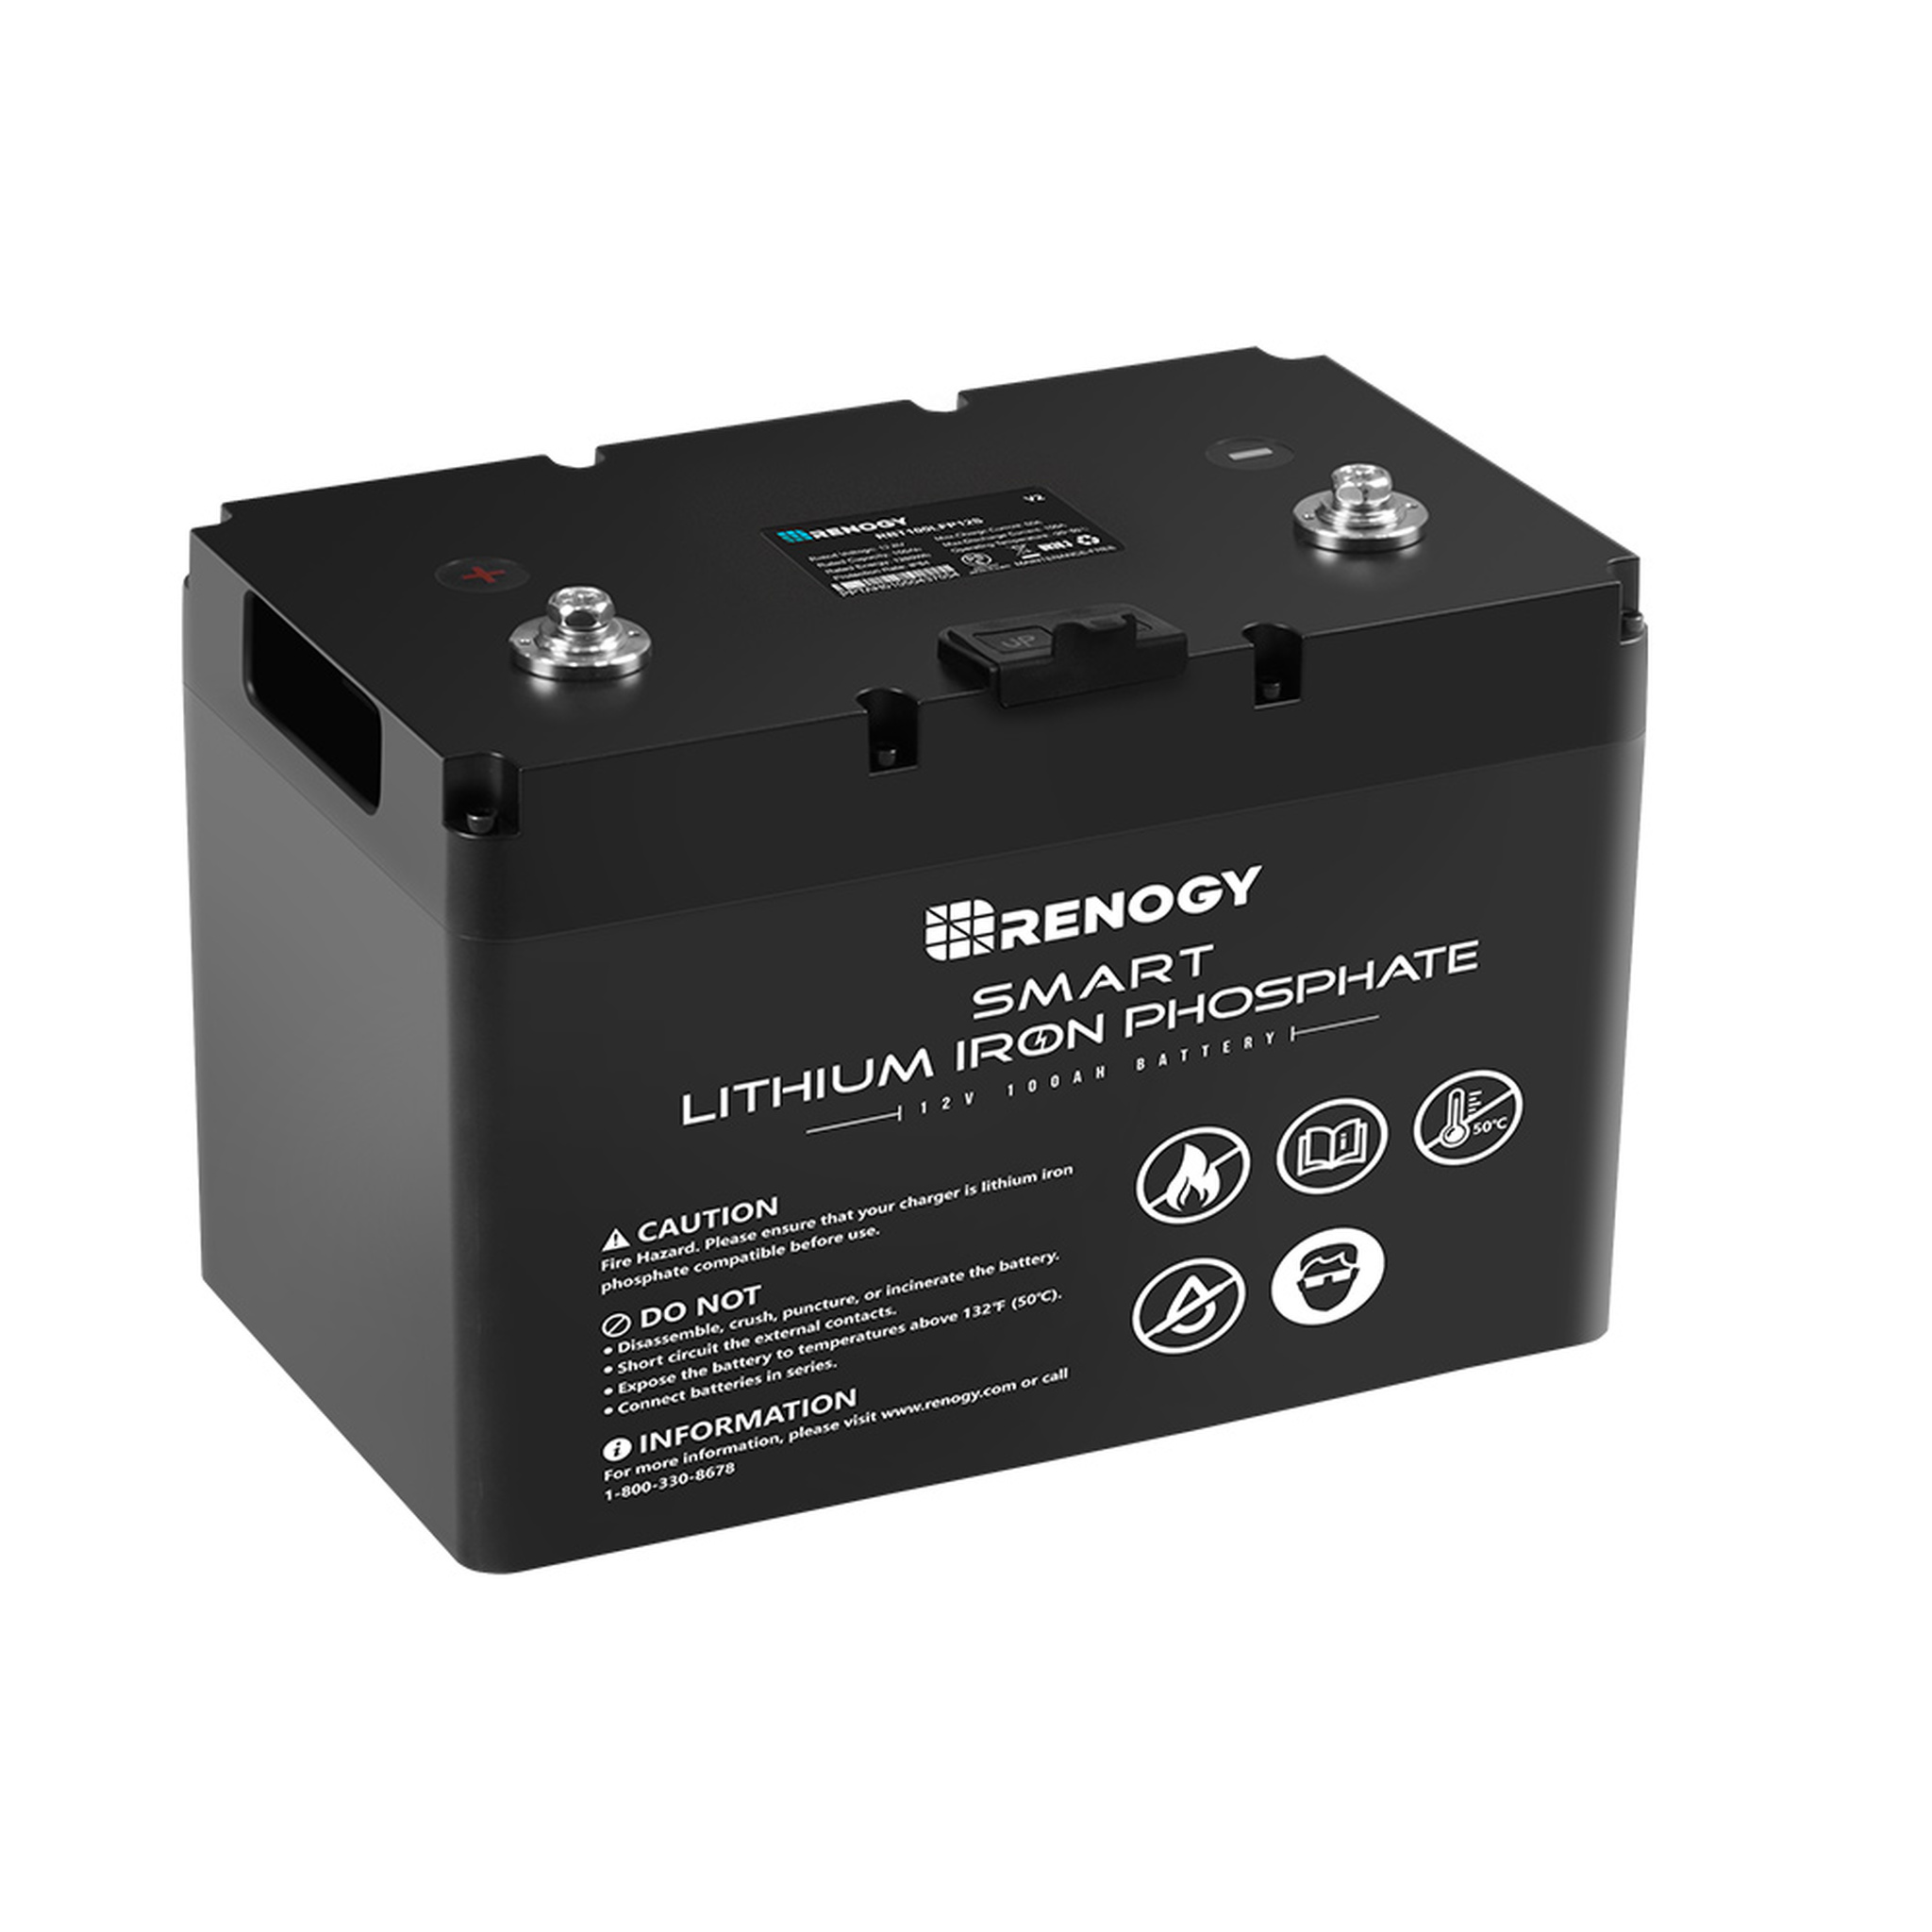 Renogy Battery Monitor: How To Monitor Your Solar Batteries 